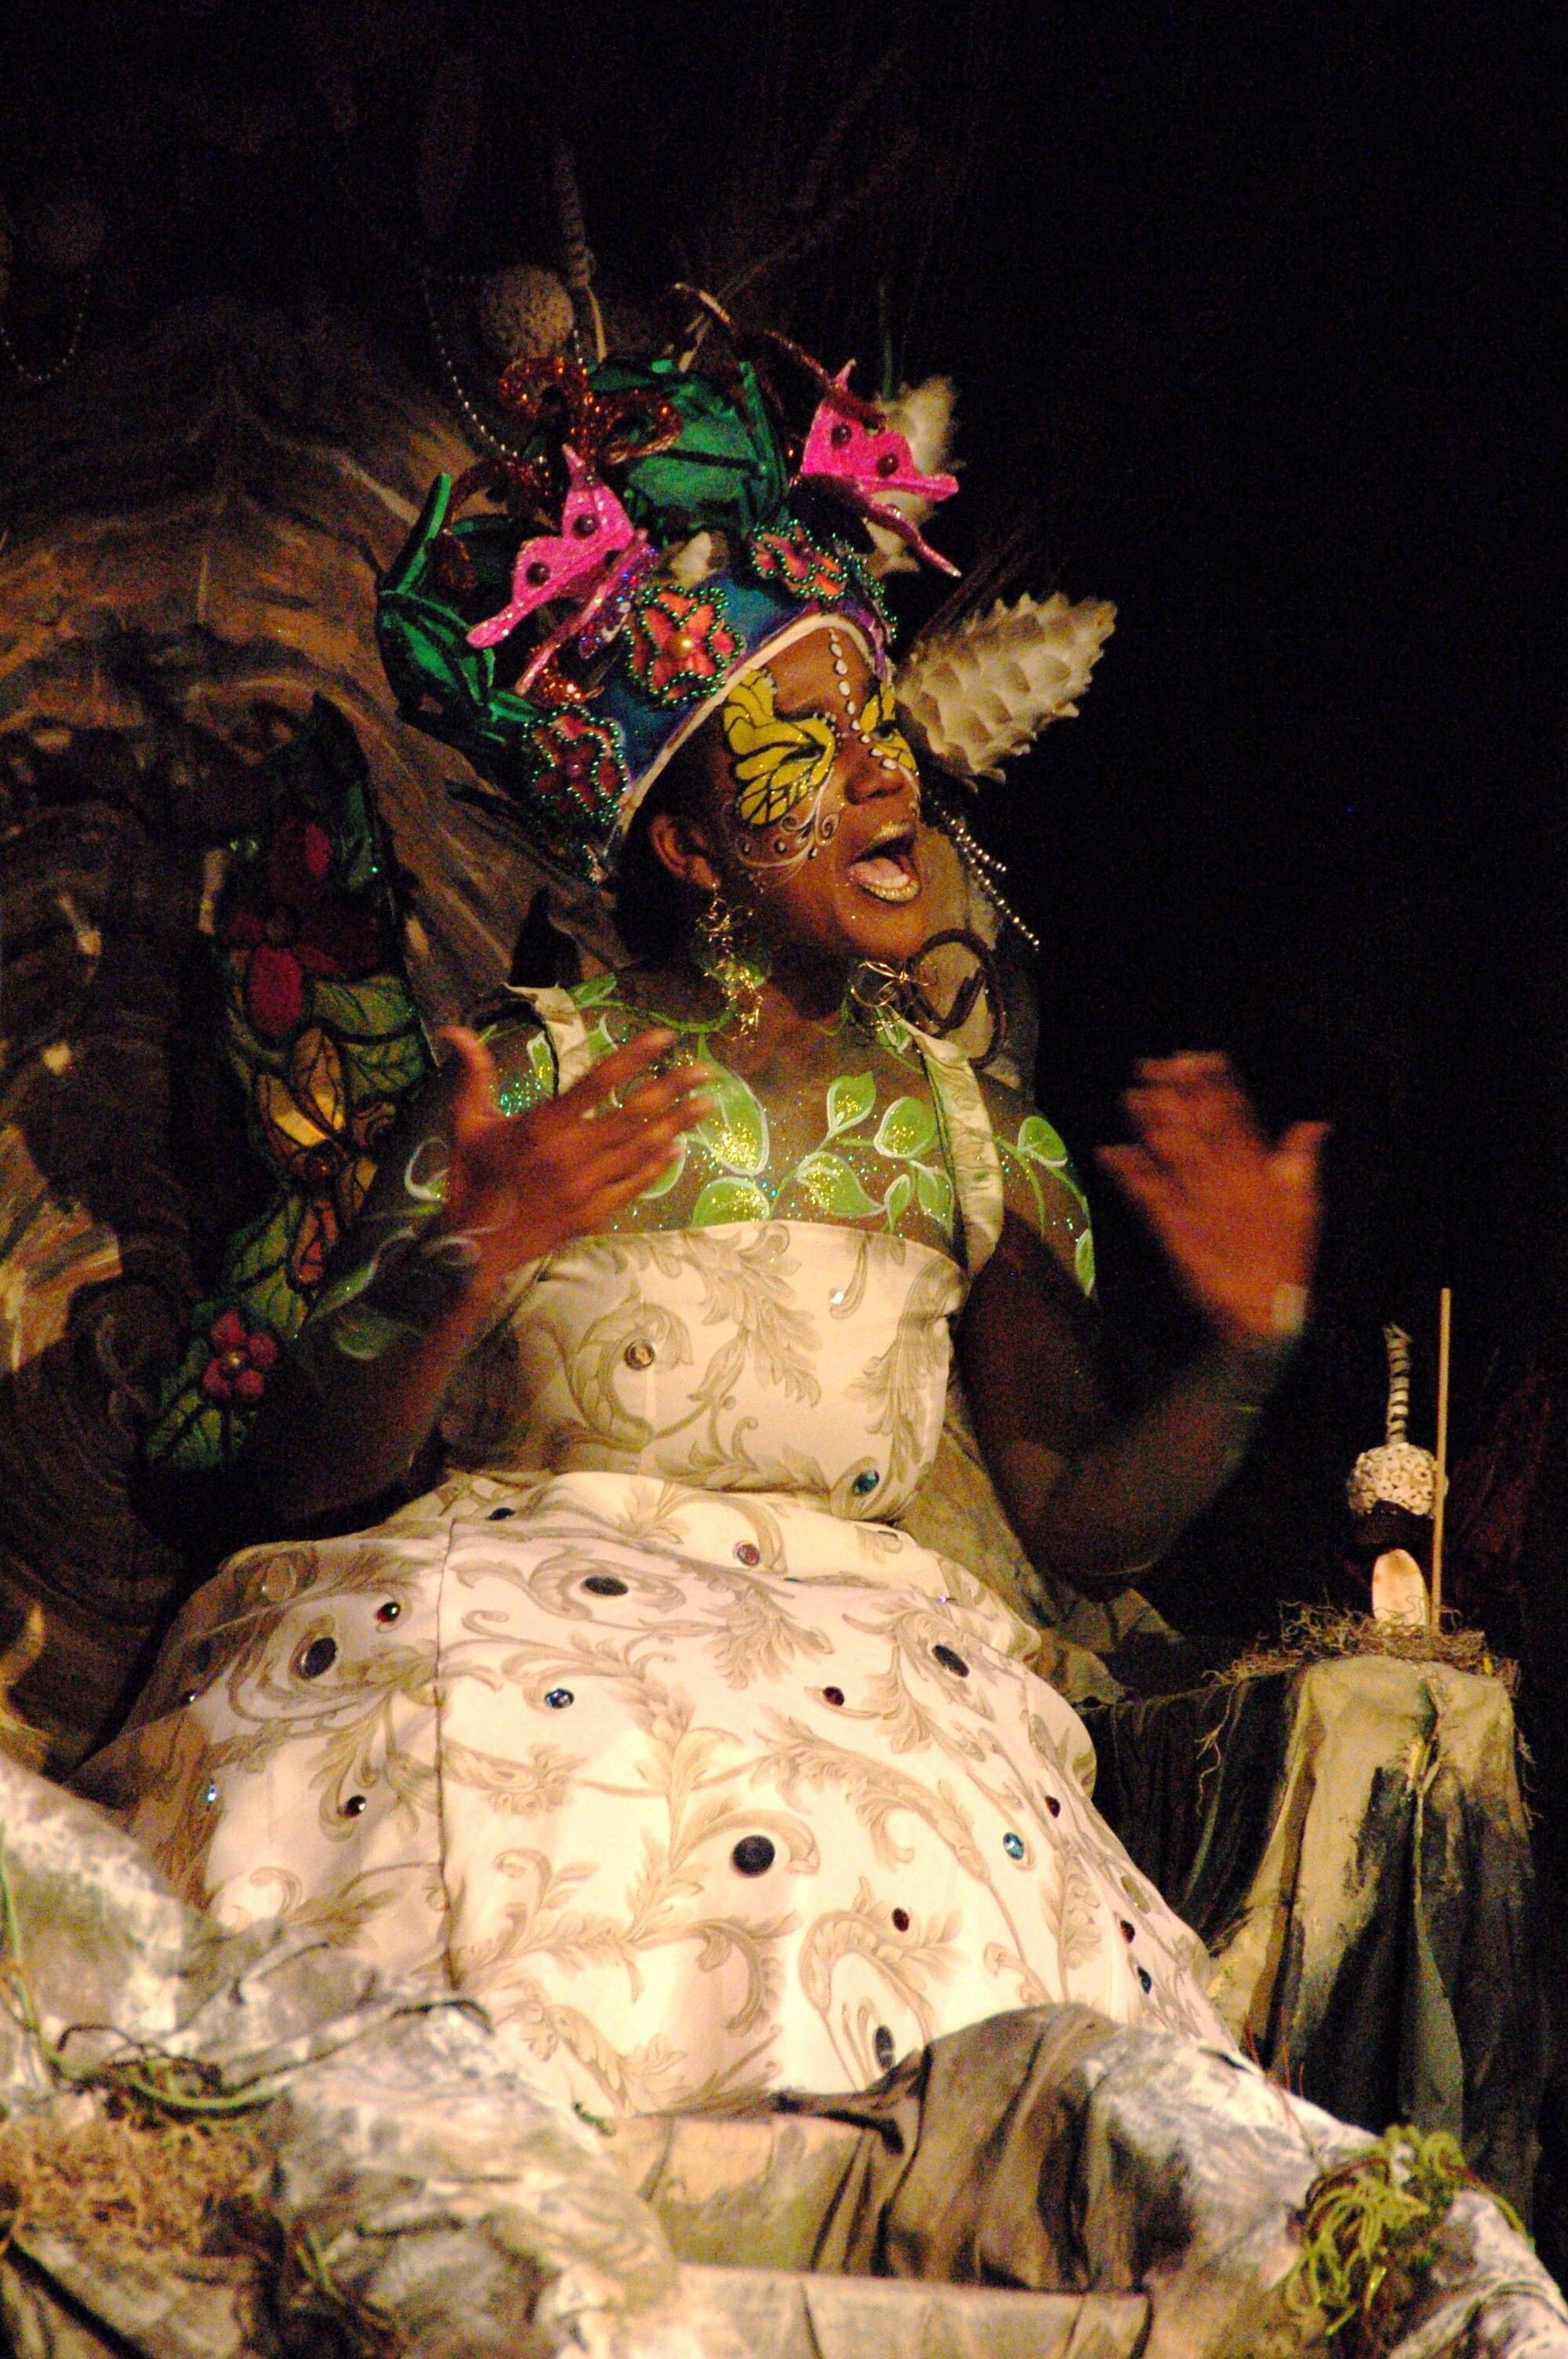 A Black actress in a dress and wearing a decorative headdress performing on stage.